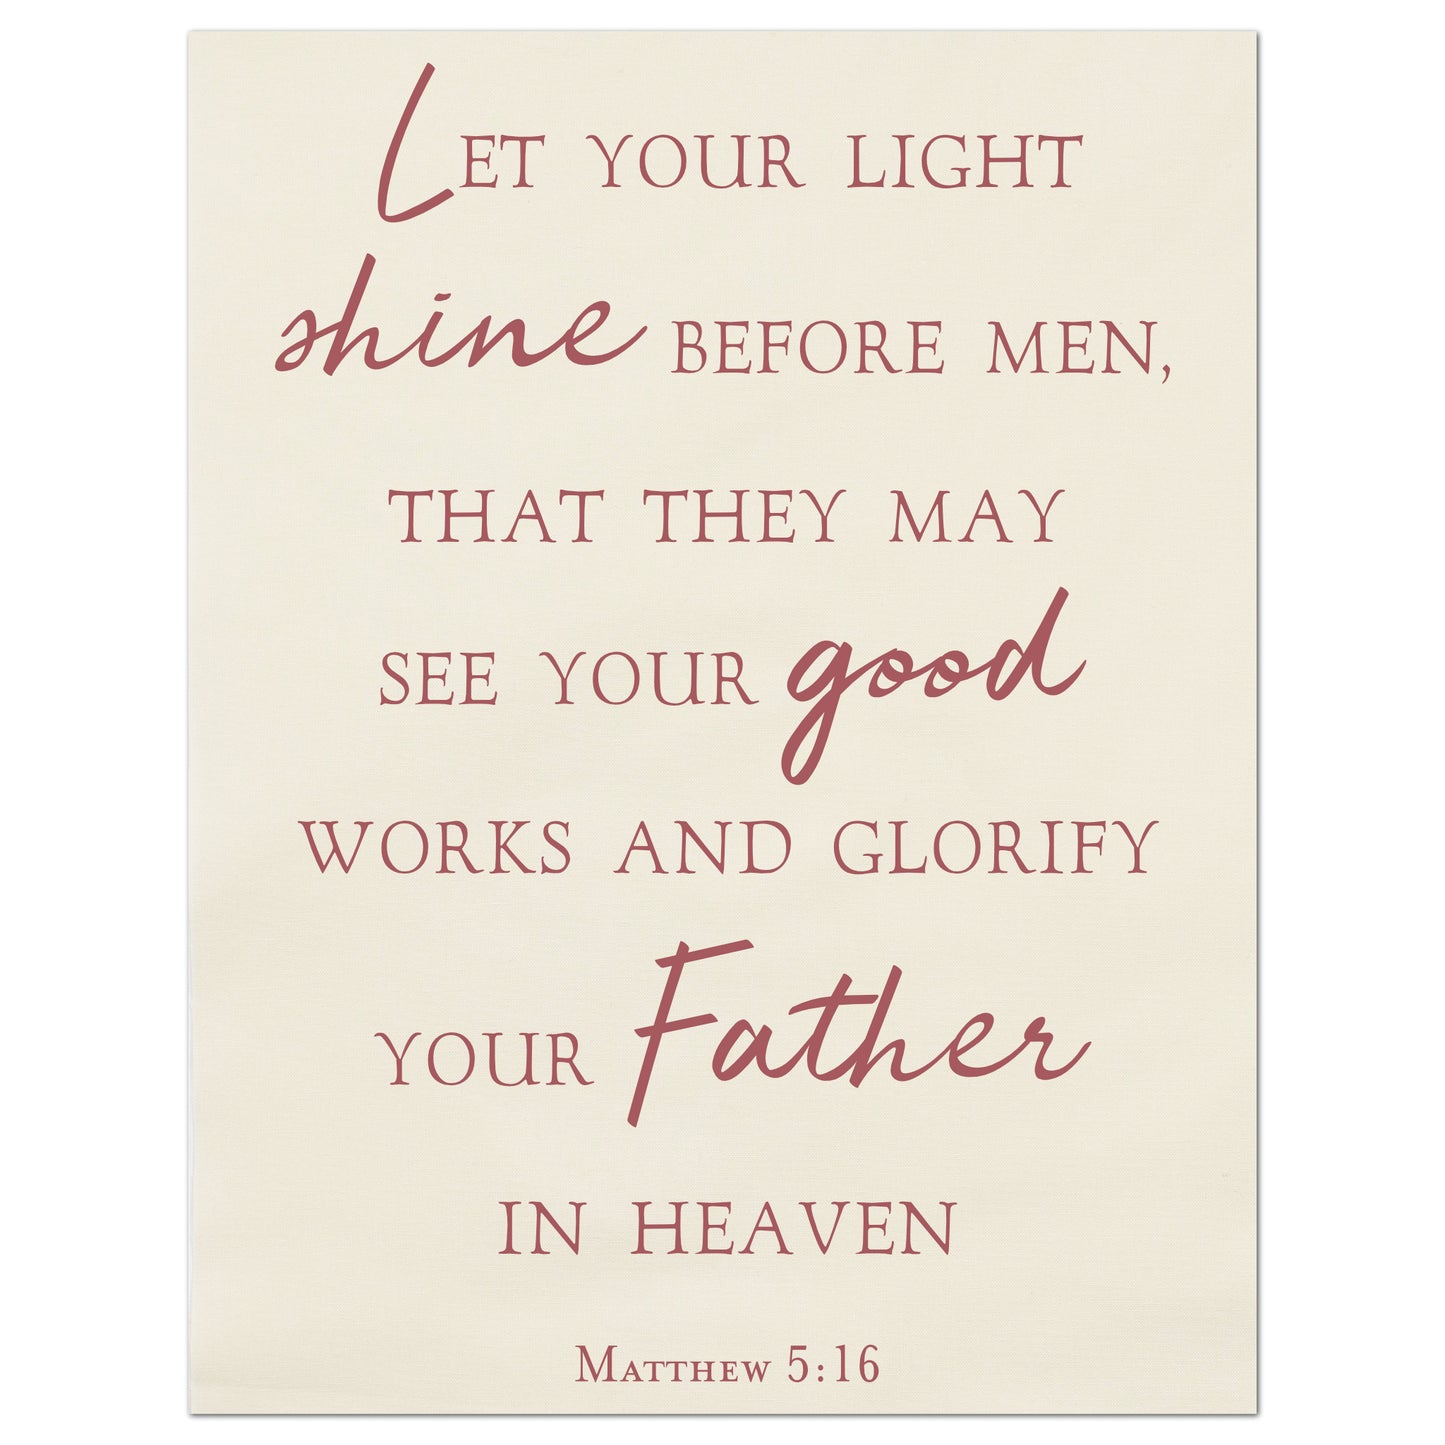 Let your light shine before men, that they may see your good works and glorify your Father in heaven. - Matthew 5 16, Fabric Panel Print